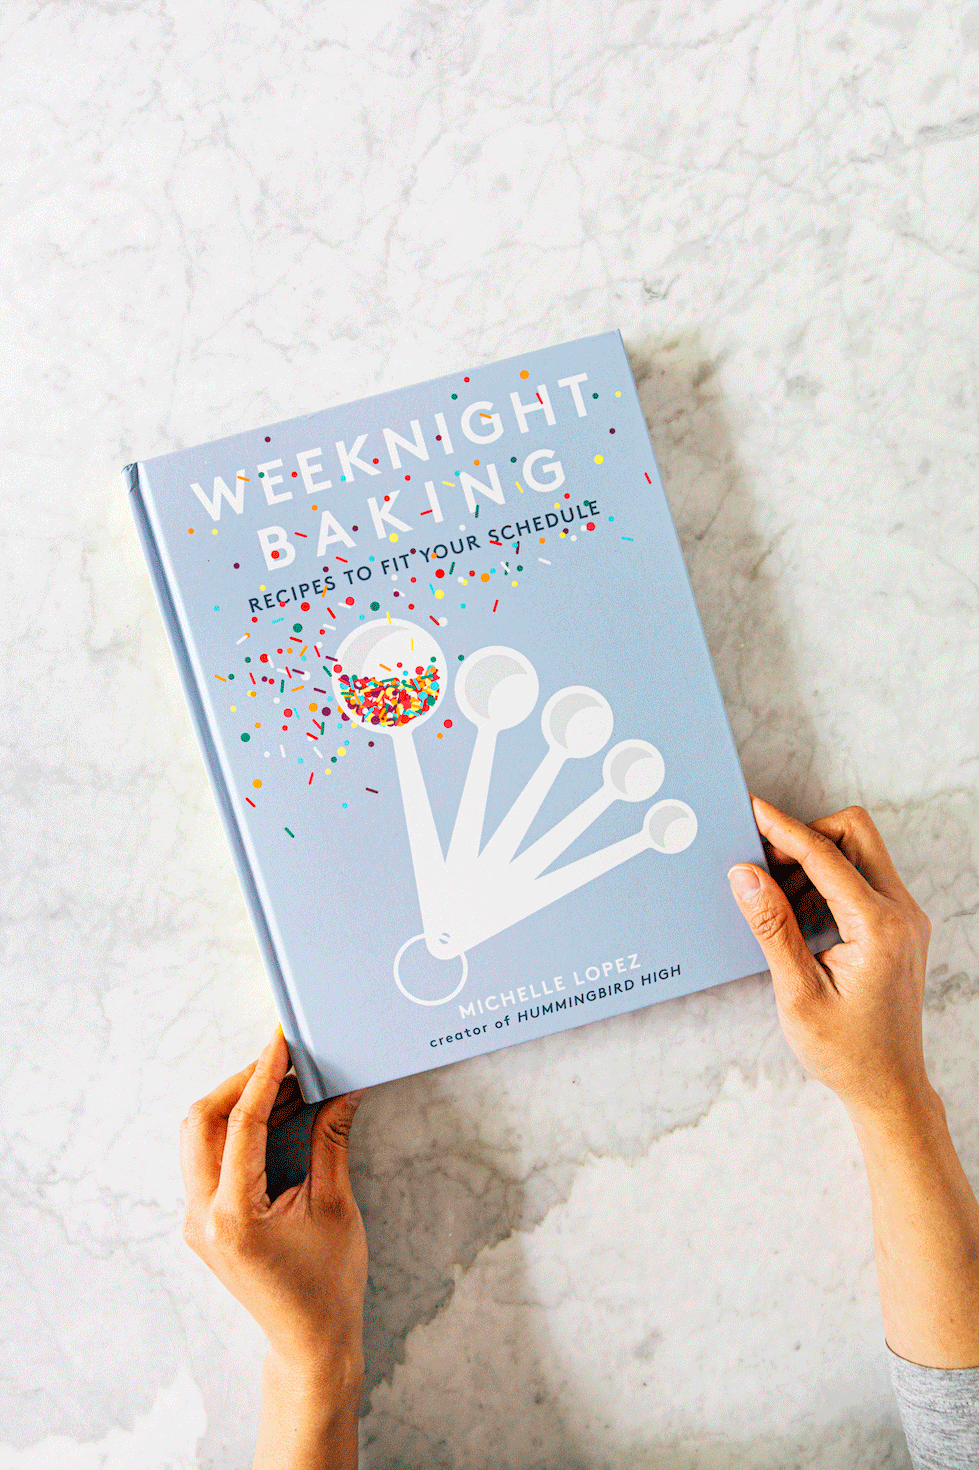 how to write a cookbook: writing and selling a proposal for  #weeknightbakingbook » Hummingbird High